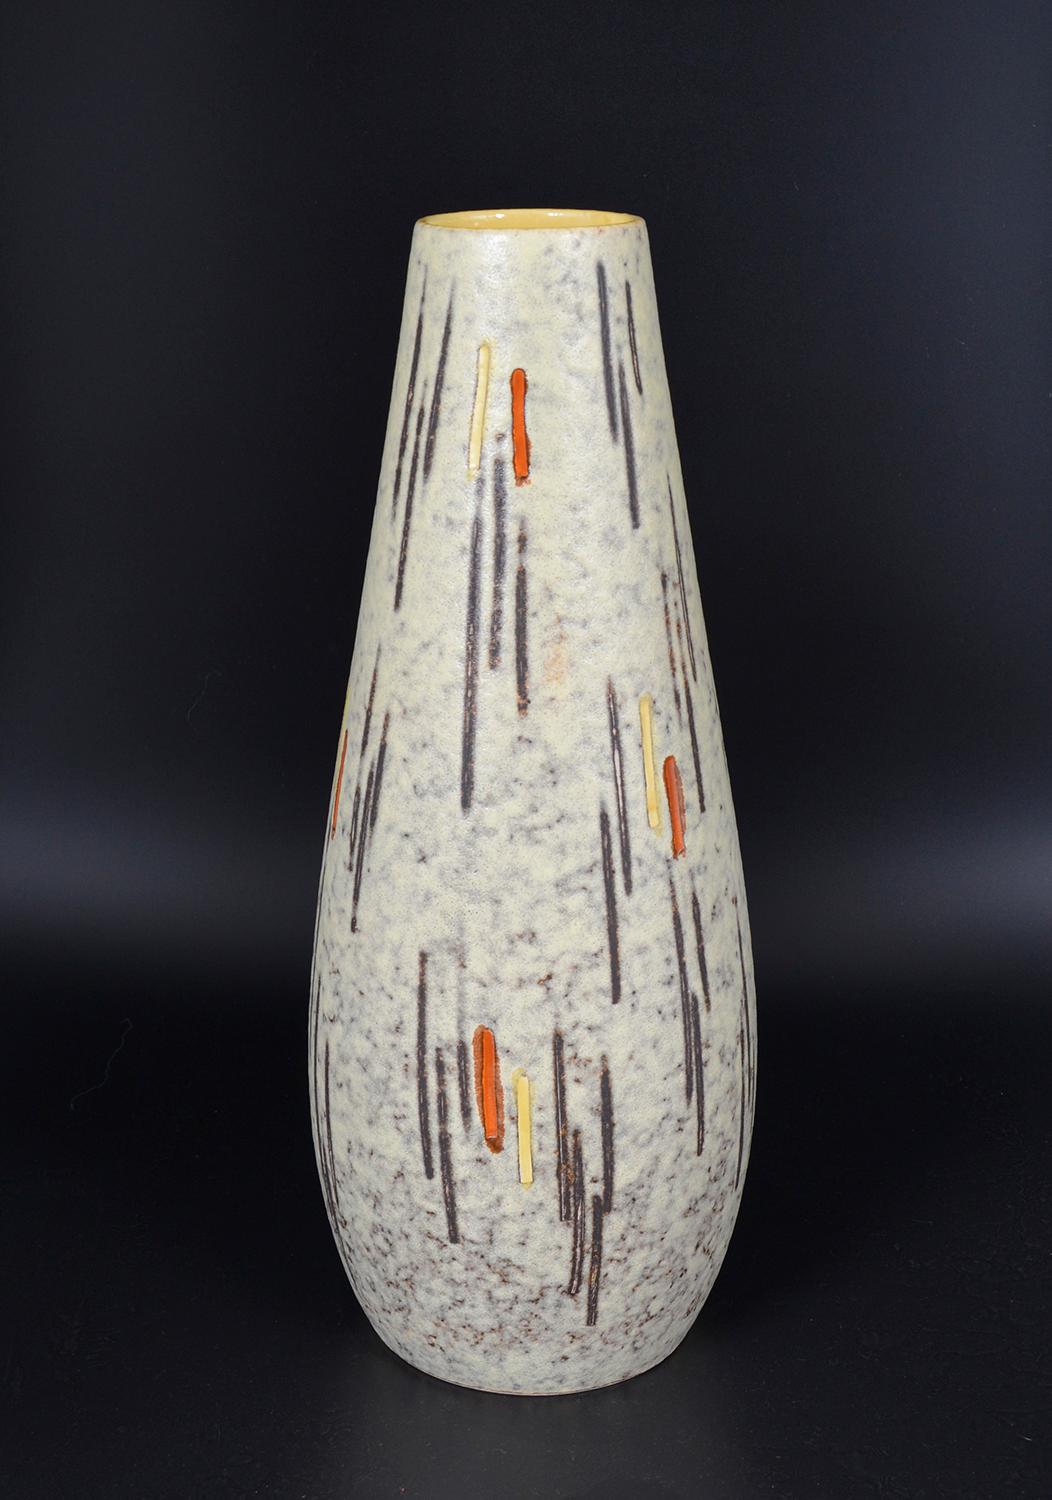 Large 1950s Scheurich pottery vase in mottled creamy/white lava finish, hand painted with black, orange and yellow stripes, with a yellow slip inside the vase. Two stickers: Scheurich and Handgemalt (handpainted) in good condition, with no chips or